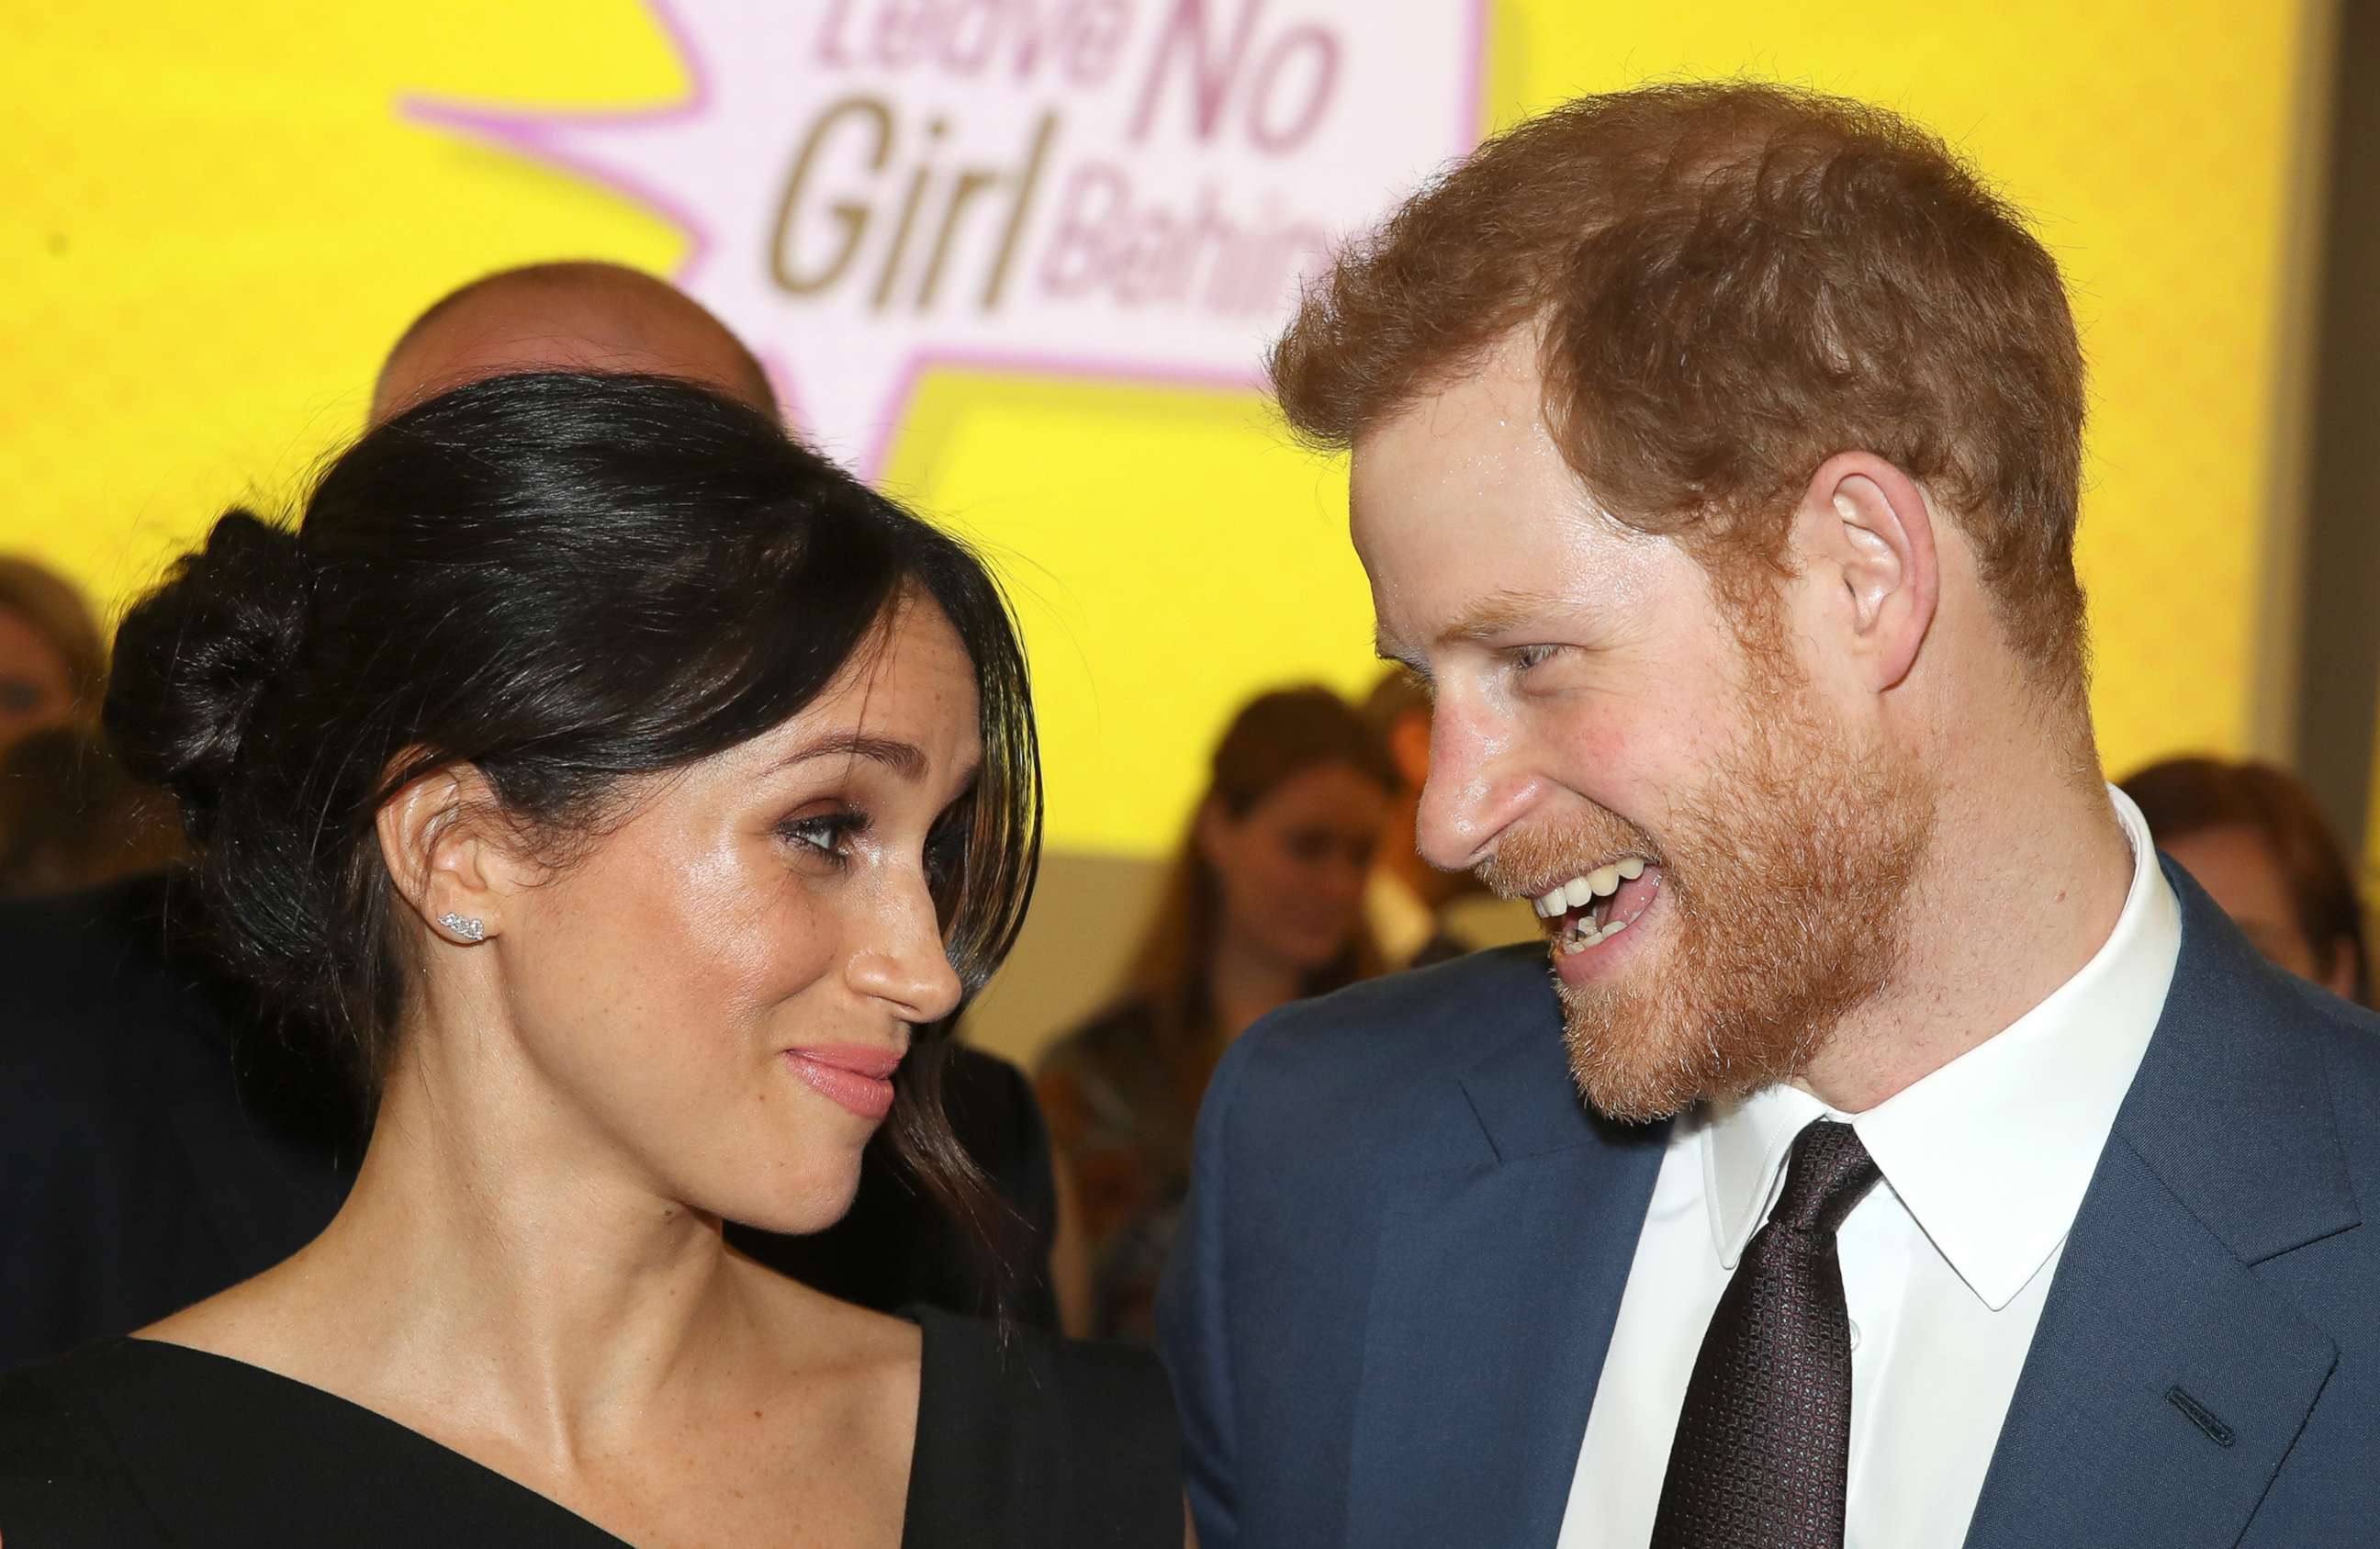 PHOTO: Meghan Markle and Prince Harry speaks they attend the Women's Empowerment reception at the Royal Aeronautical Society, April 19, 2018, in London.